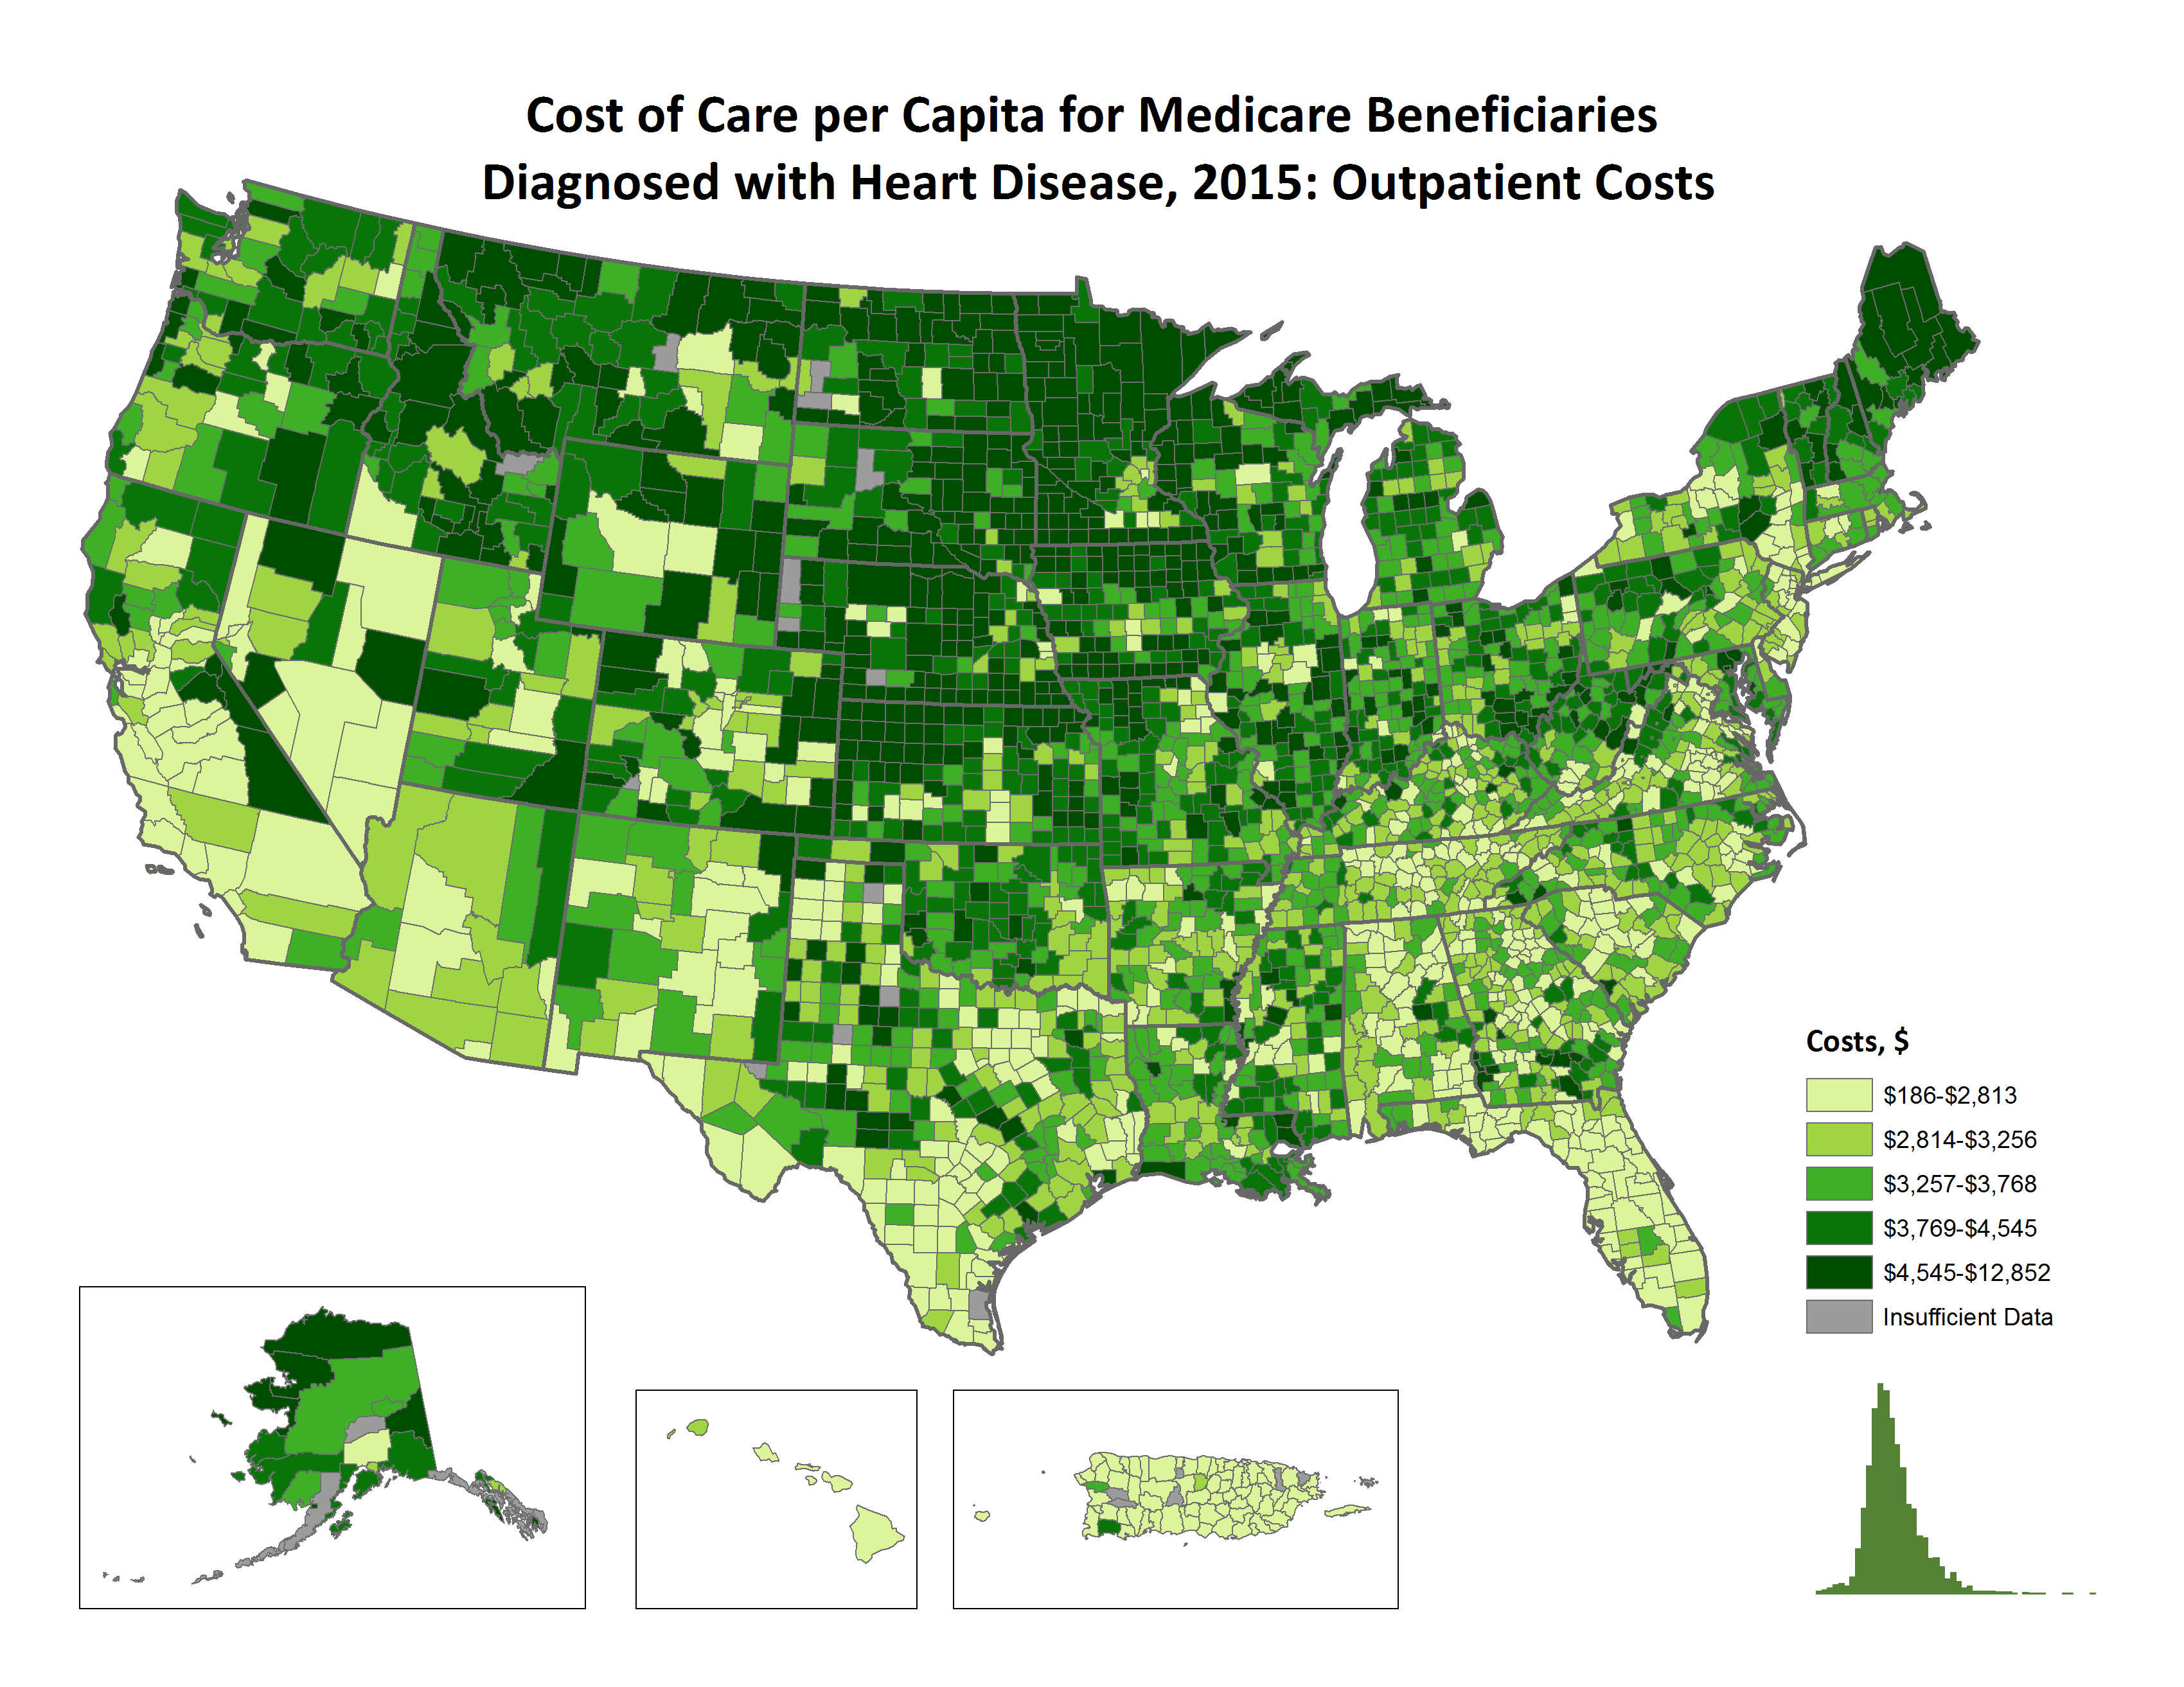 Costs of Care per Capita for FFS Medicare beneficiaries diagnosed with Heart Disease, 2015: Outpatient Costs, by county. This map shows the concentrations of counties with the highest outpatient costs per capita – meaning the top quintile – are located primarily in Minnesota, North Dakota, Montana, Idaho, South Dakota, Iowa, Kansas, Nebraska, Maine, with pockets in Nevada, east central California, Oregon, and Washington.